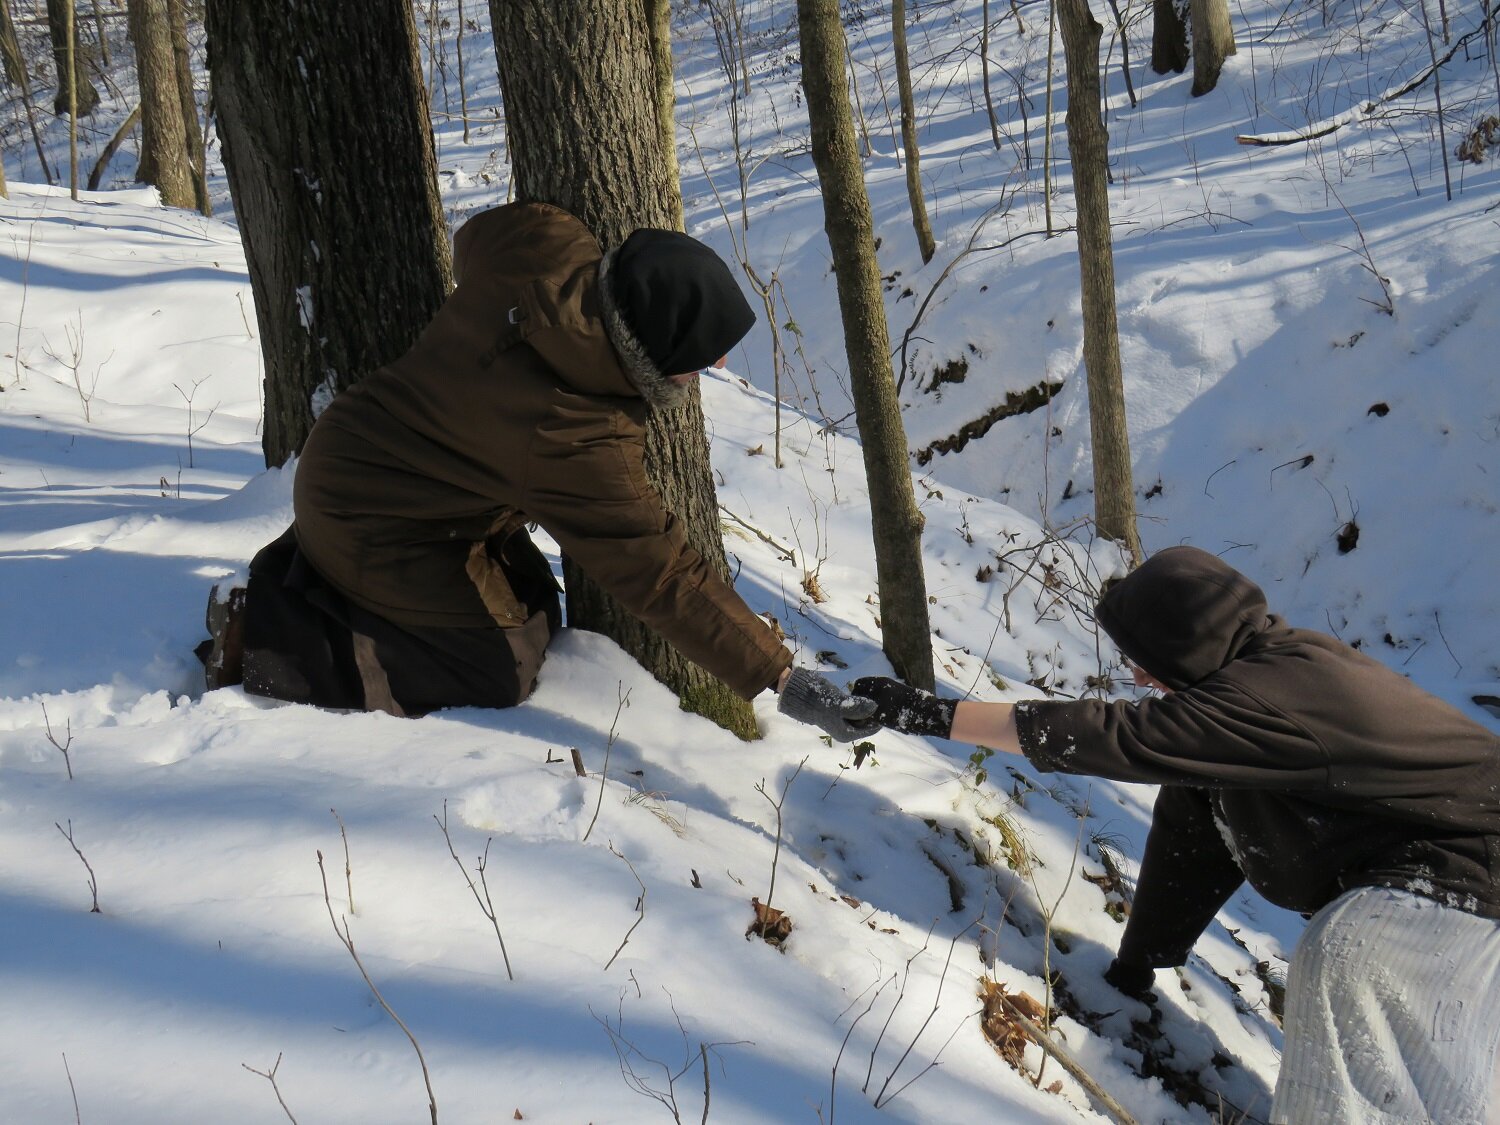  Crossing a deep ravine in the snow takes teamwork! 